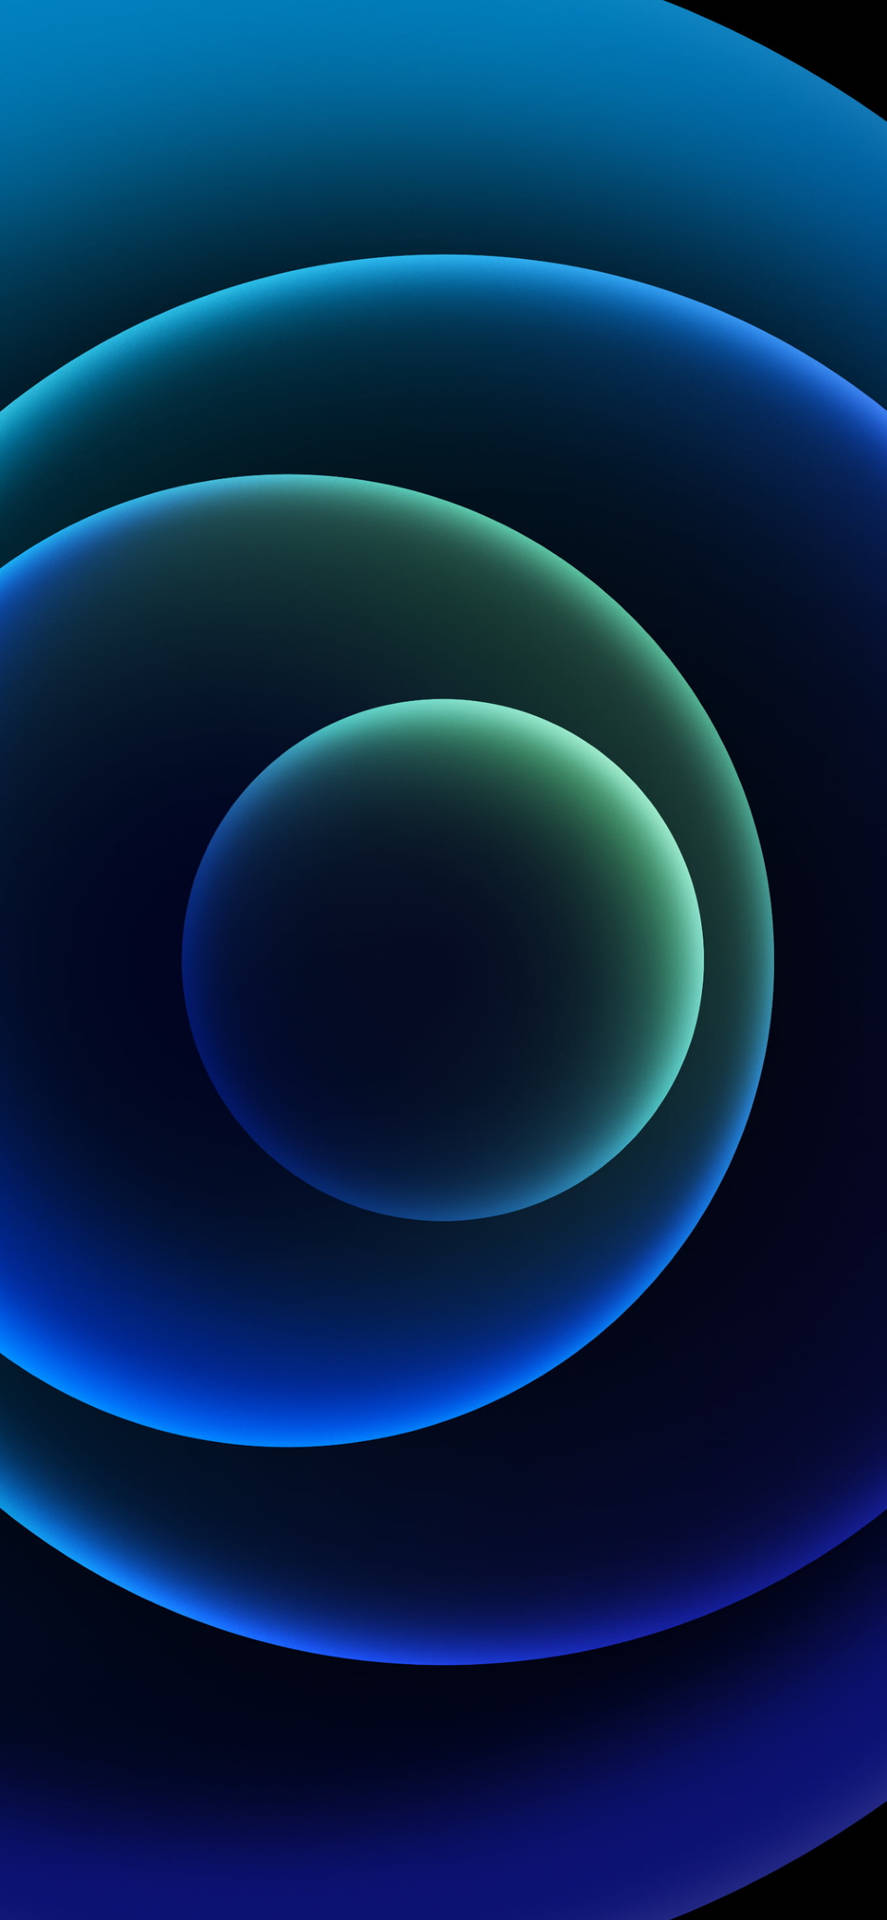 Iphone 11 Black Concentric Orbs Background